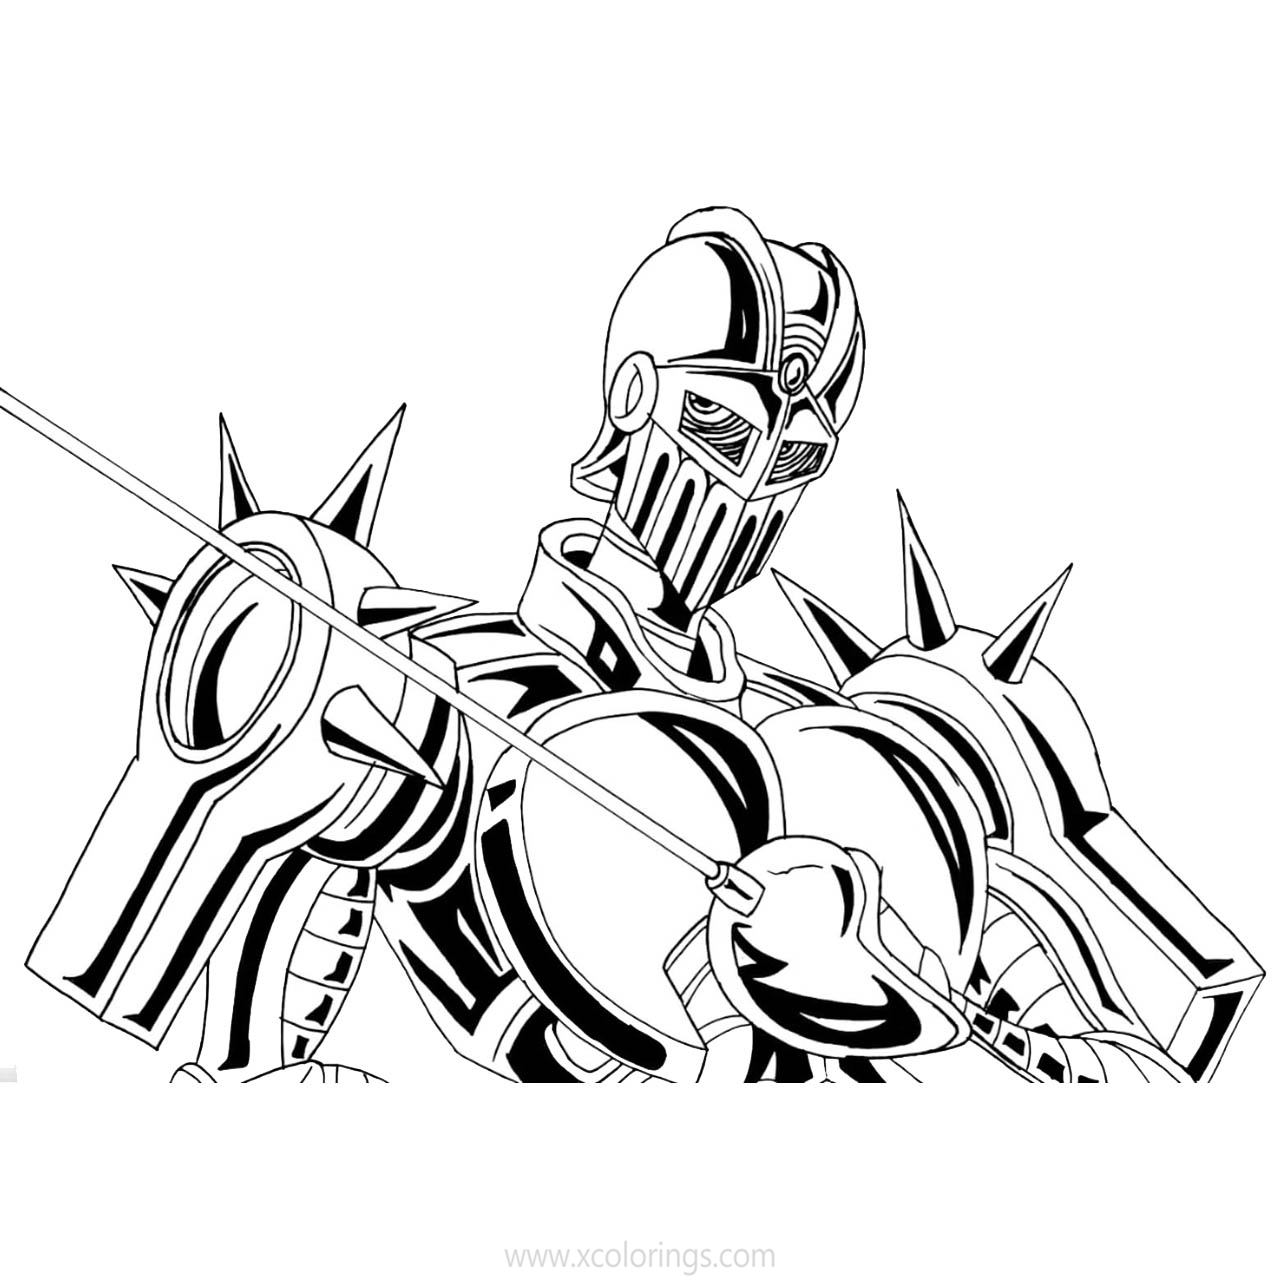 Free JoJo's Bizarre Adventure Coloring Pages Silver Chariot printable